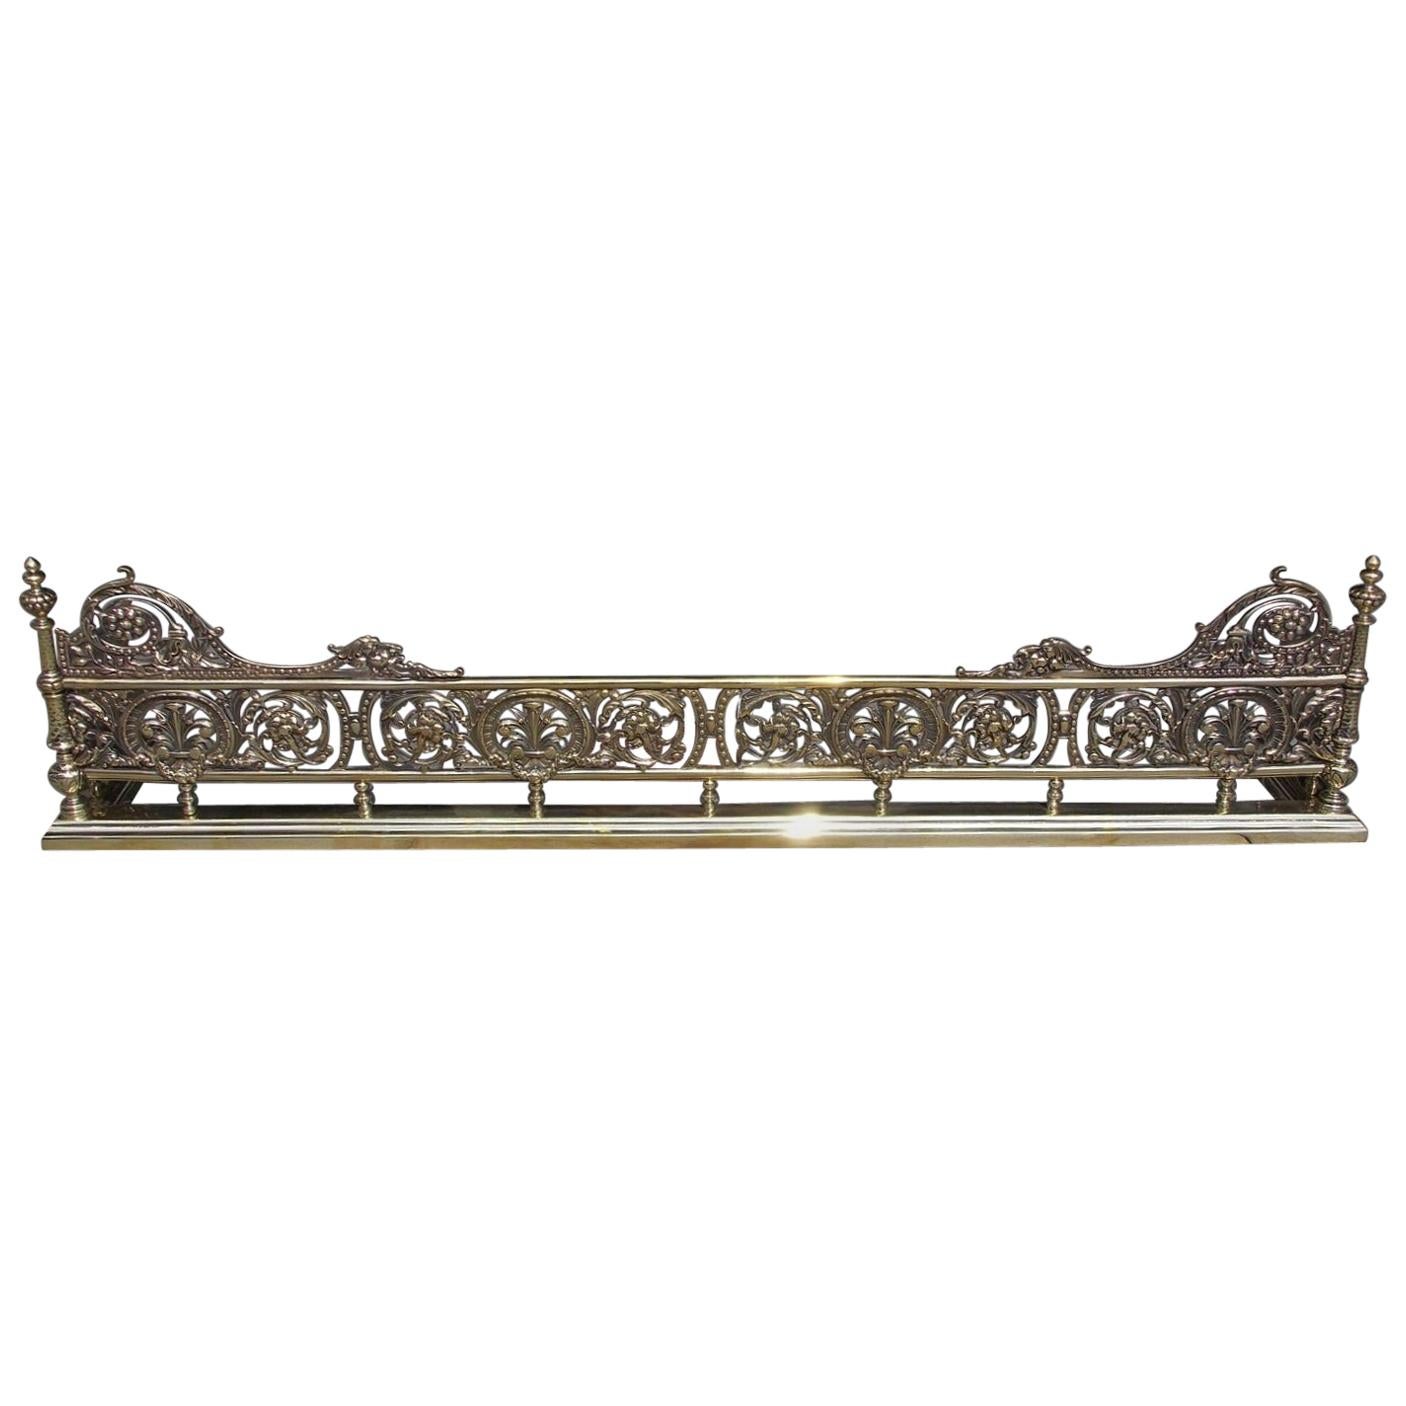 English Brass Gallery Foliage Fire Place Fender with Flanking Finials. C. 1820